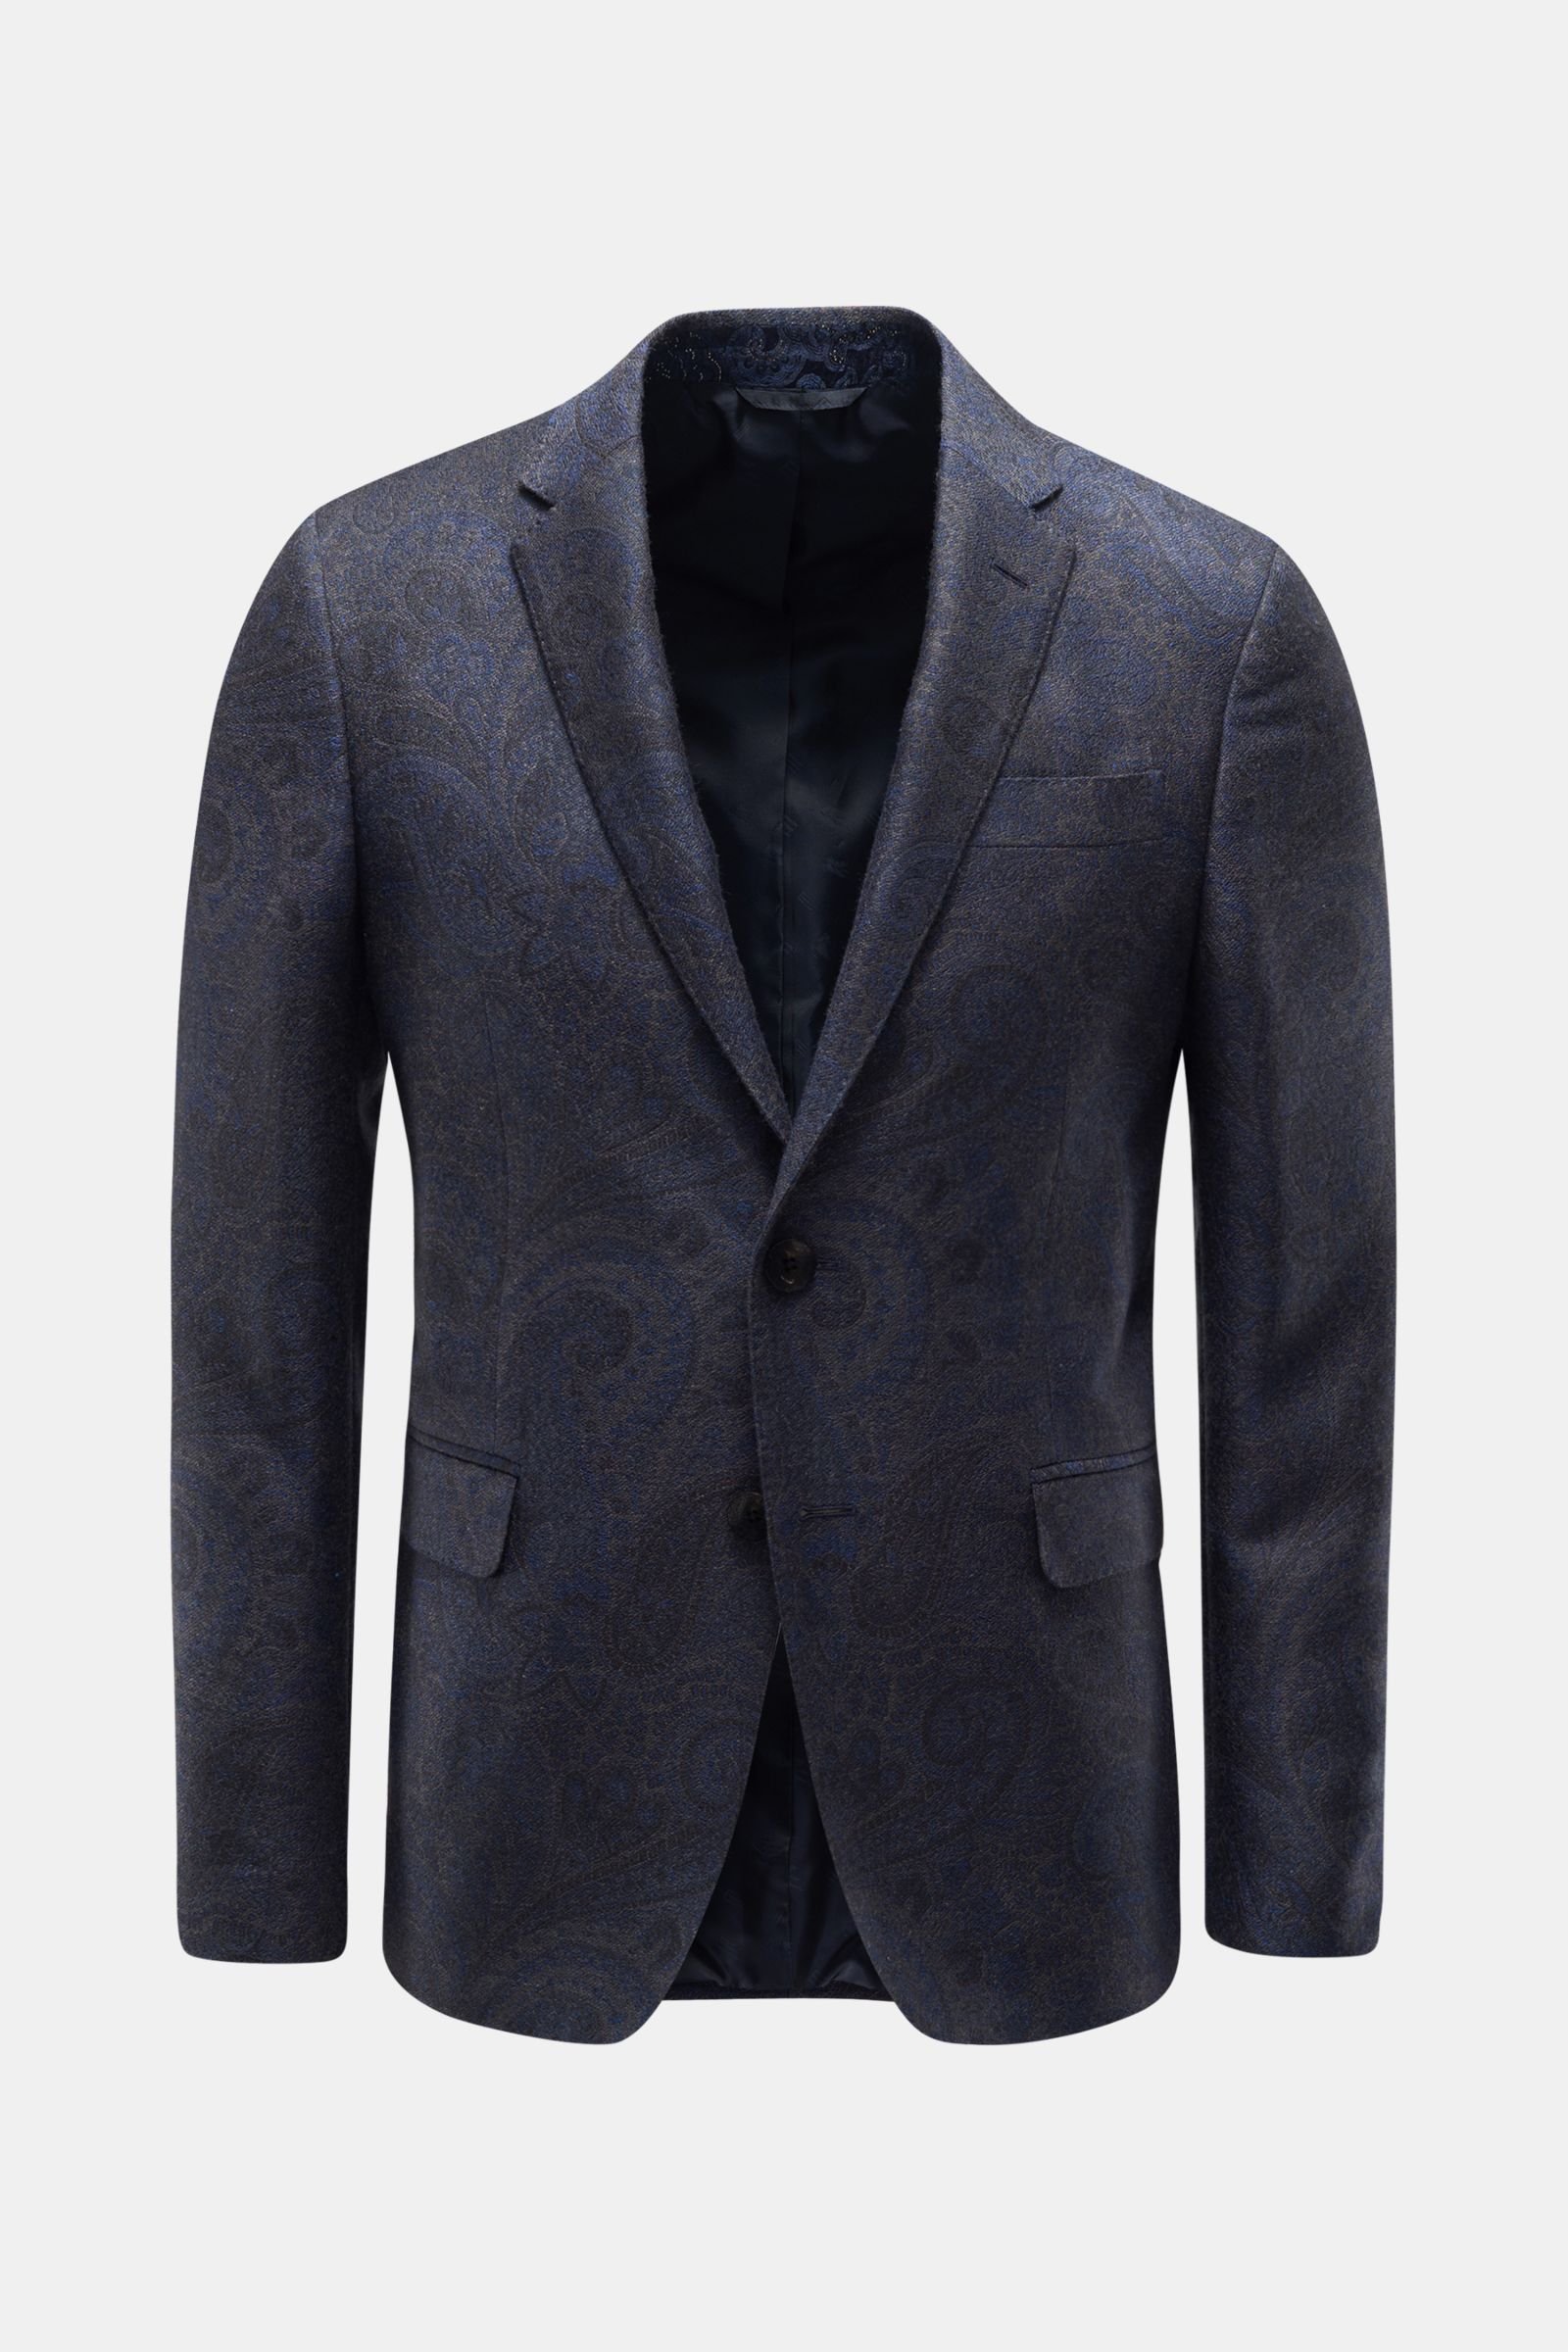 Jacquard smart-casual jacket anthracite/navy patterned